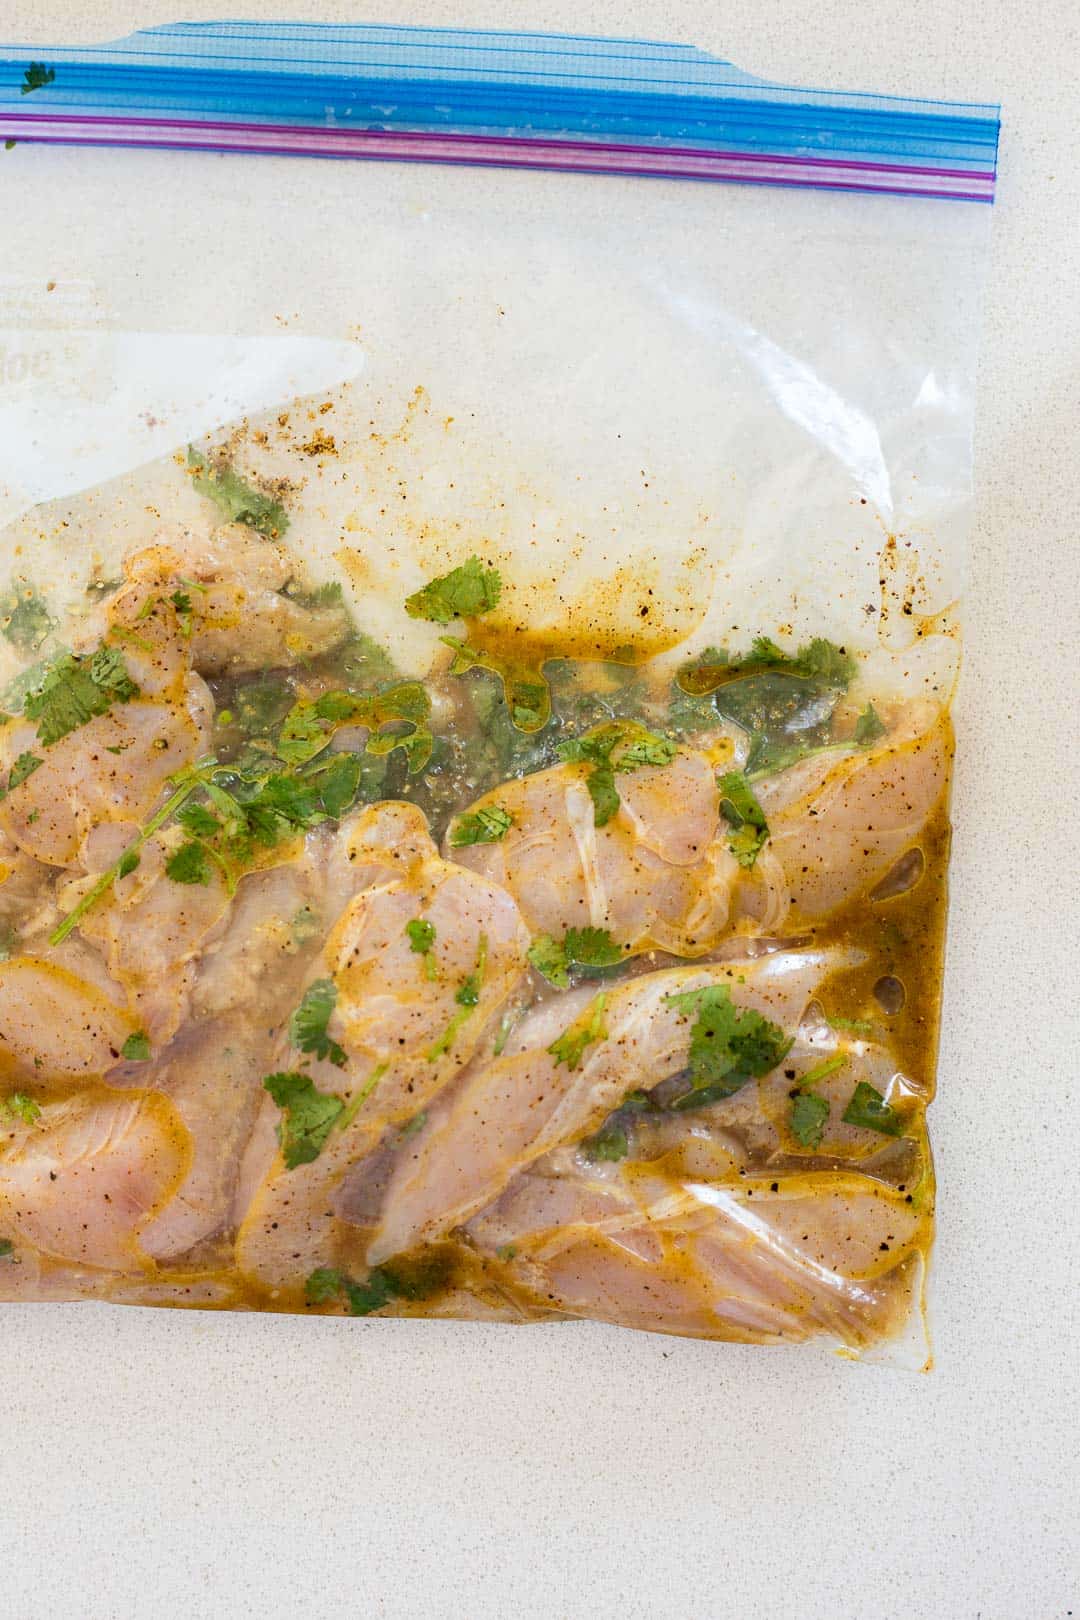 Chicken breast marinating in a bag